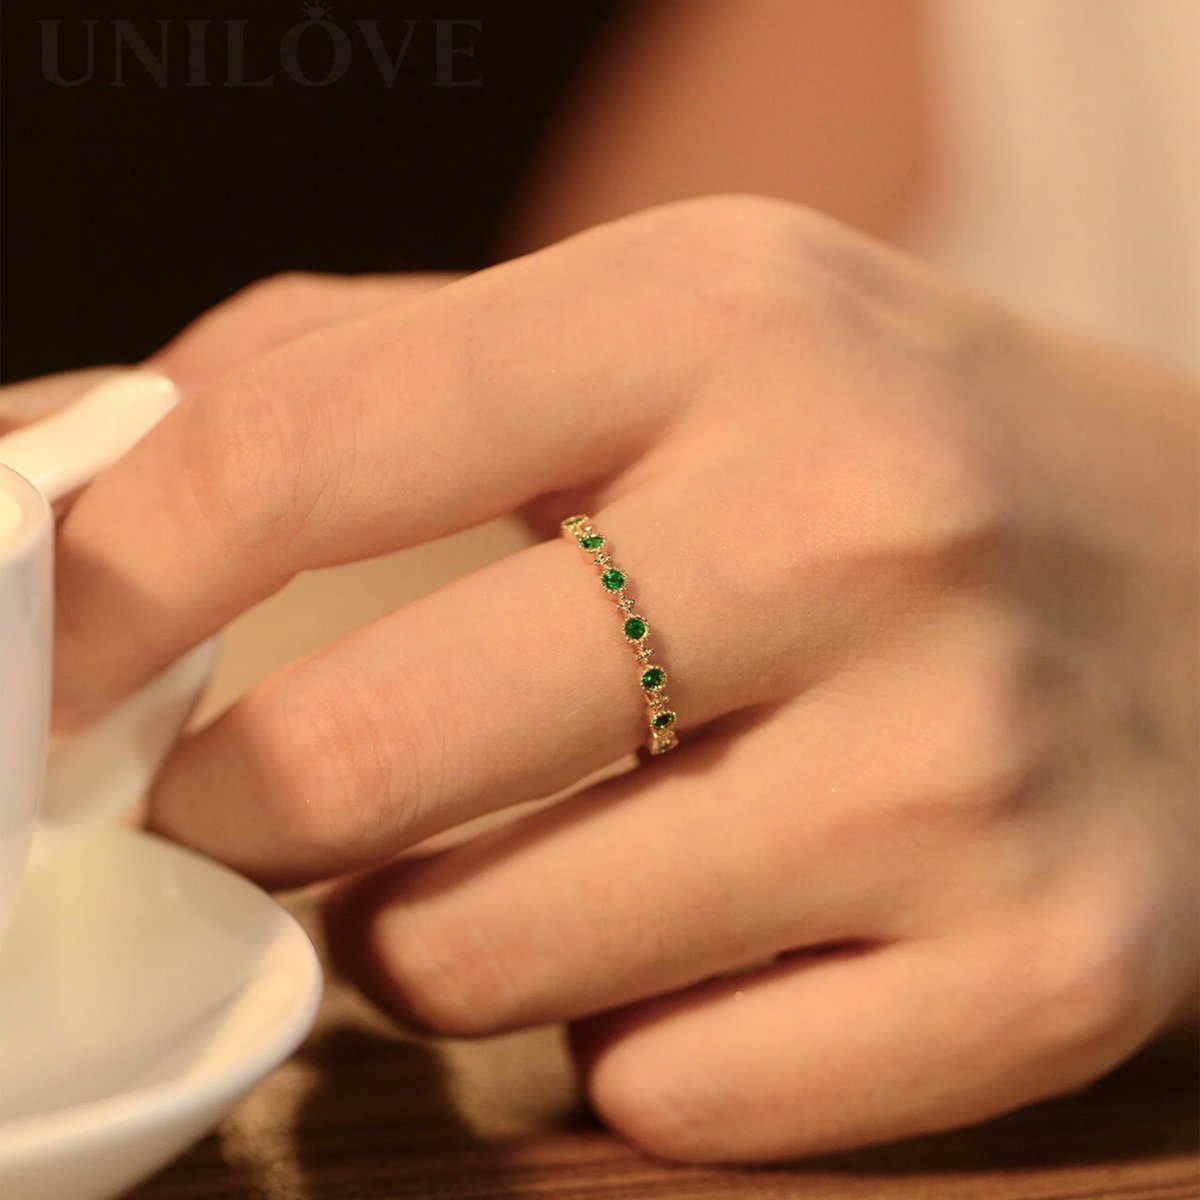 Create a lasting memory with a customized emerald ring. Crafted with precision and passion to symbolize your unique bond. WhatsApp: +8618520595760 #CustomizedDiamondRing #LastingMemory #UniqueBond #emeraldring